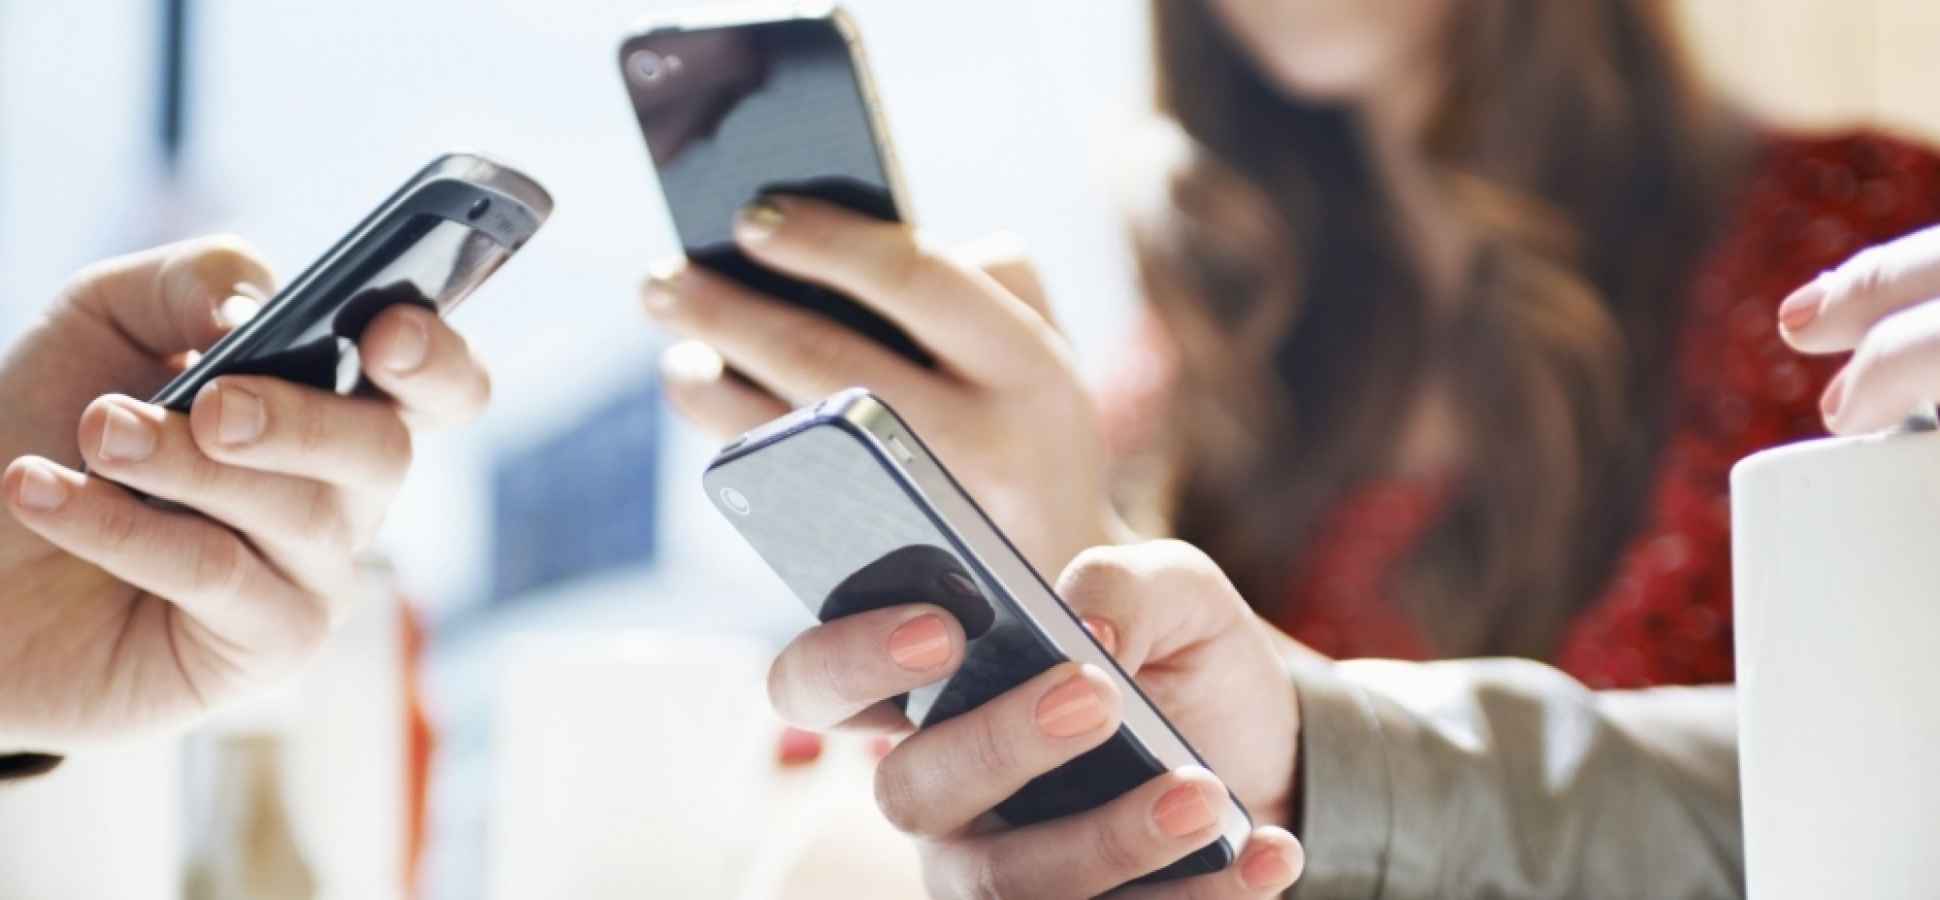 6 Apps to Stop Your Smartphone Addiction